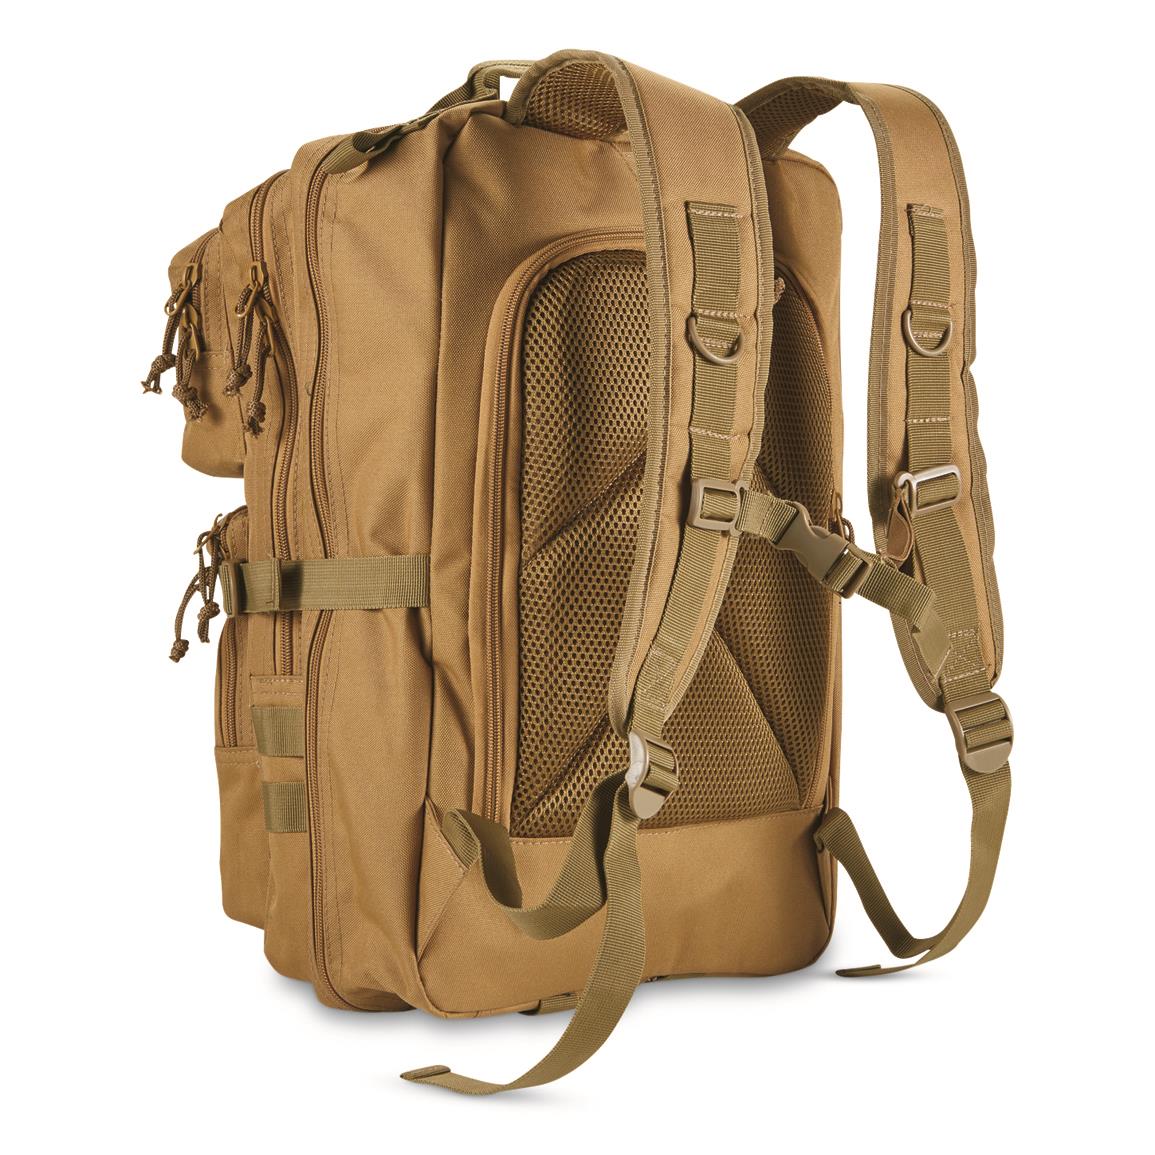 Mil-Tec 20L Assault Pack, Phantomleaf WASP I Camo - 735045, Tactical  Accessories at Sportsman's Guide